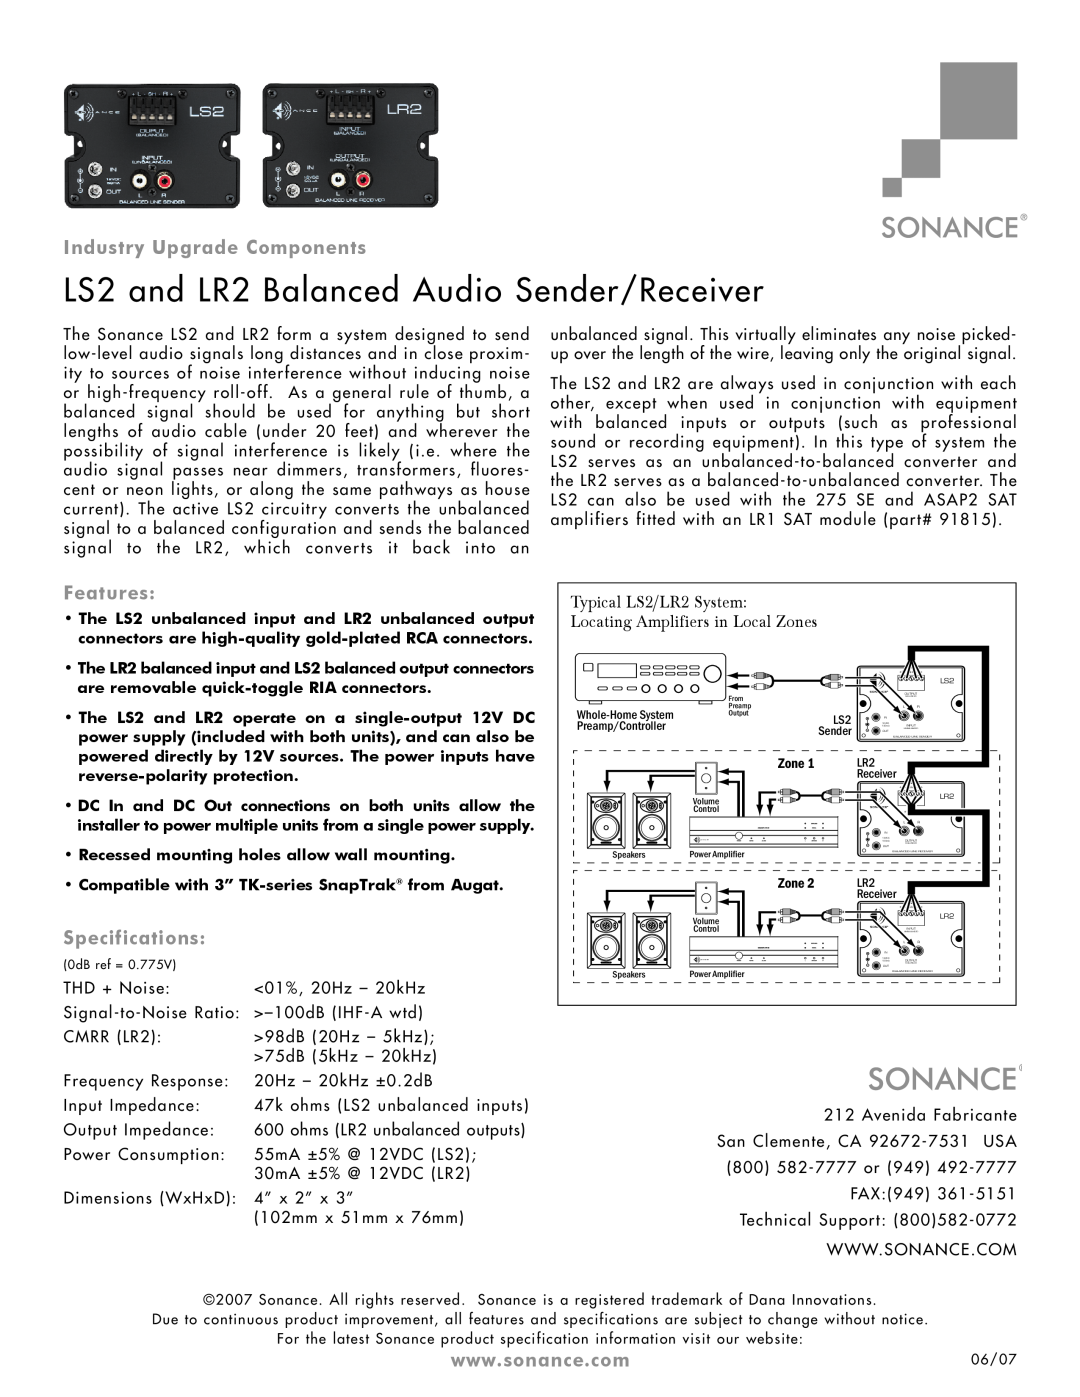 Sonance specifications LS2 and LR2 Balanced Audio Sender/Receiver, Industry Upgrade Components, Features 